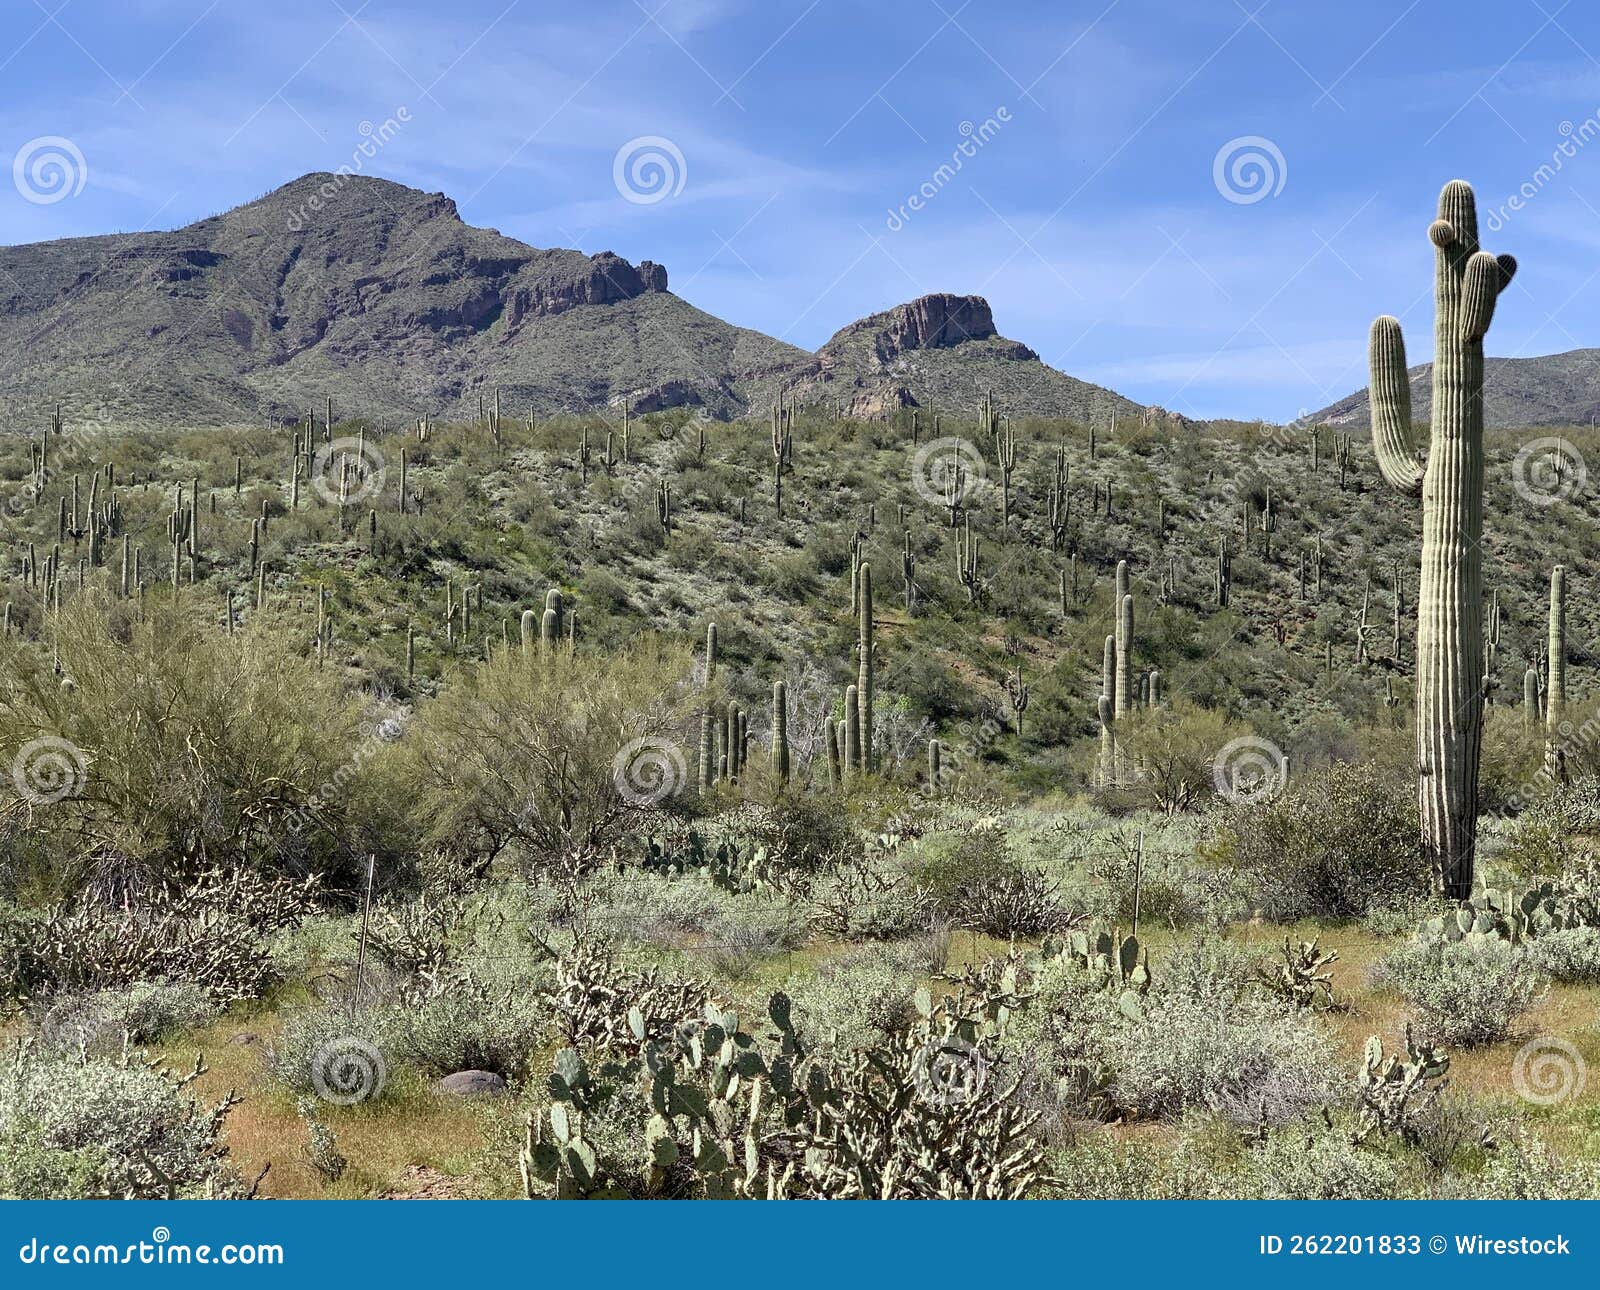 landscape view of the sonoran desert with cactus in cave cree, arizona